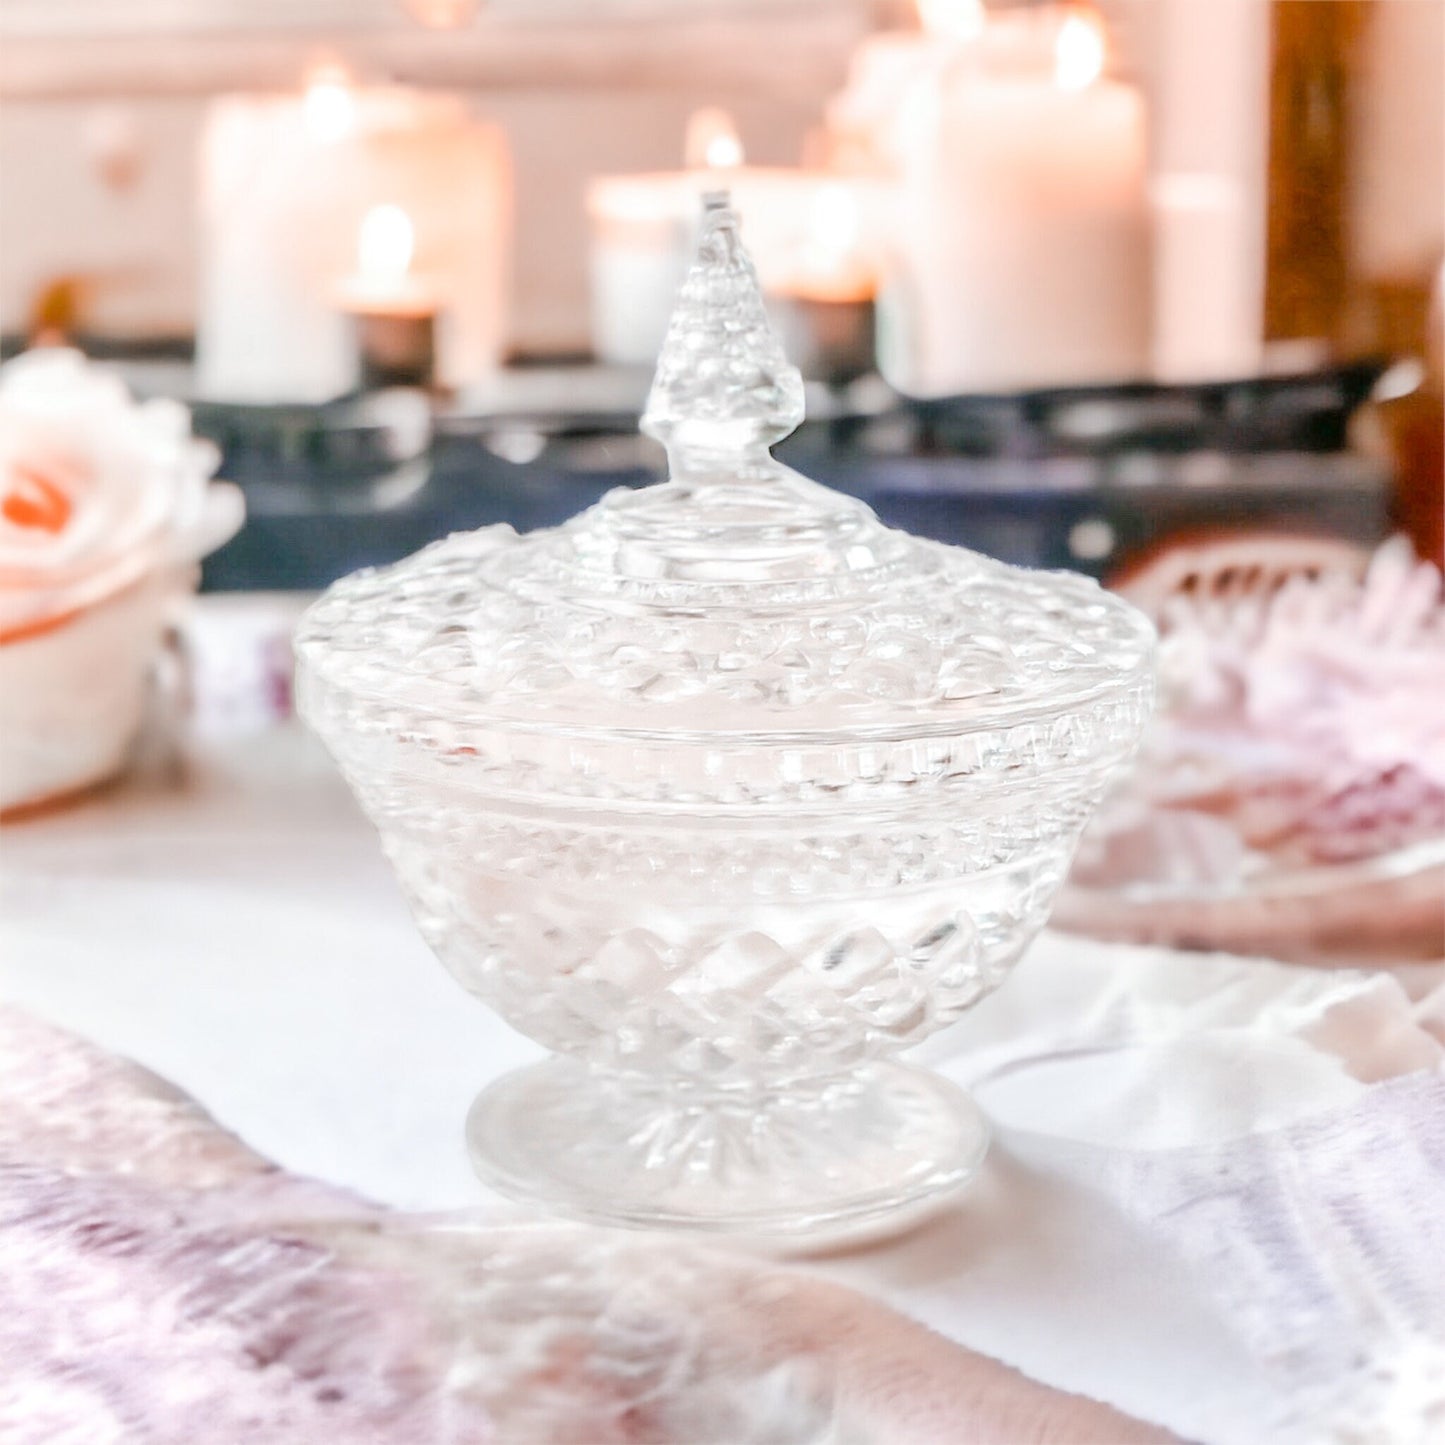 Scented Candle in Vintage Candy Dish